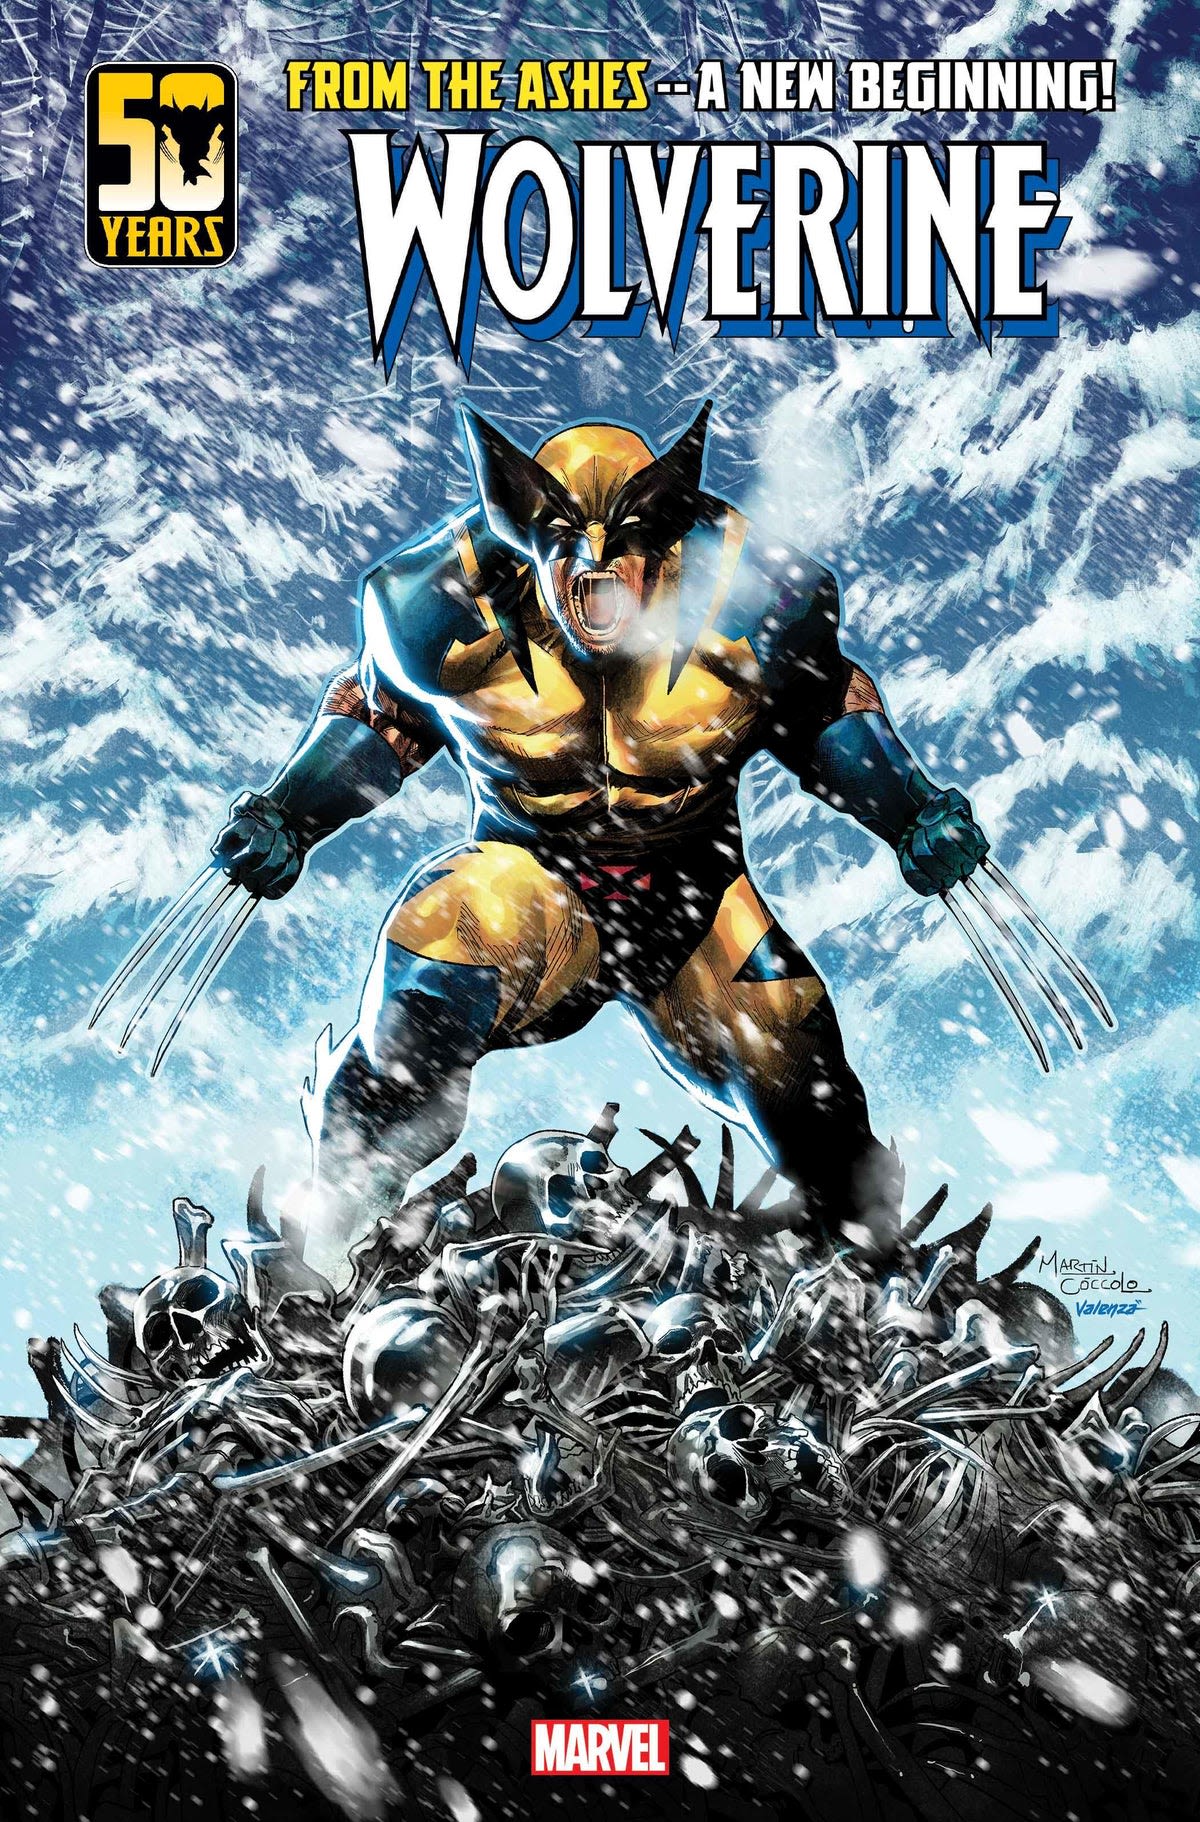 Wolverine Series Announced for X-Men: From The Ashes Relaunch